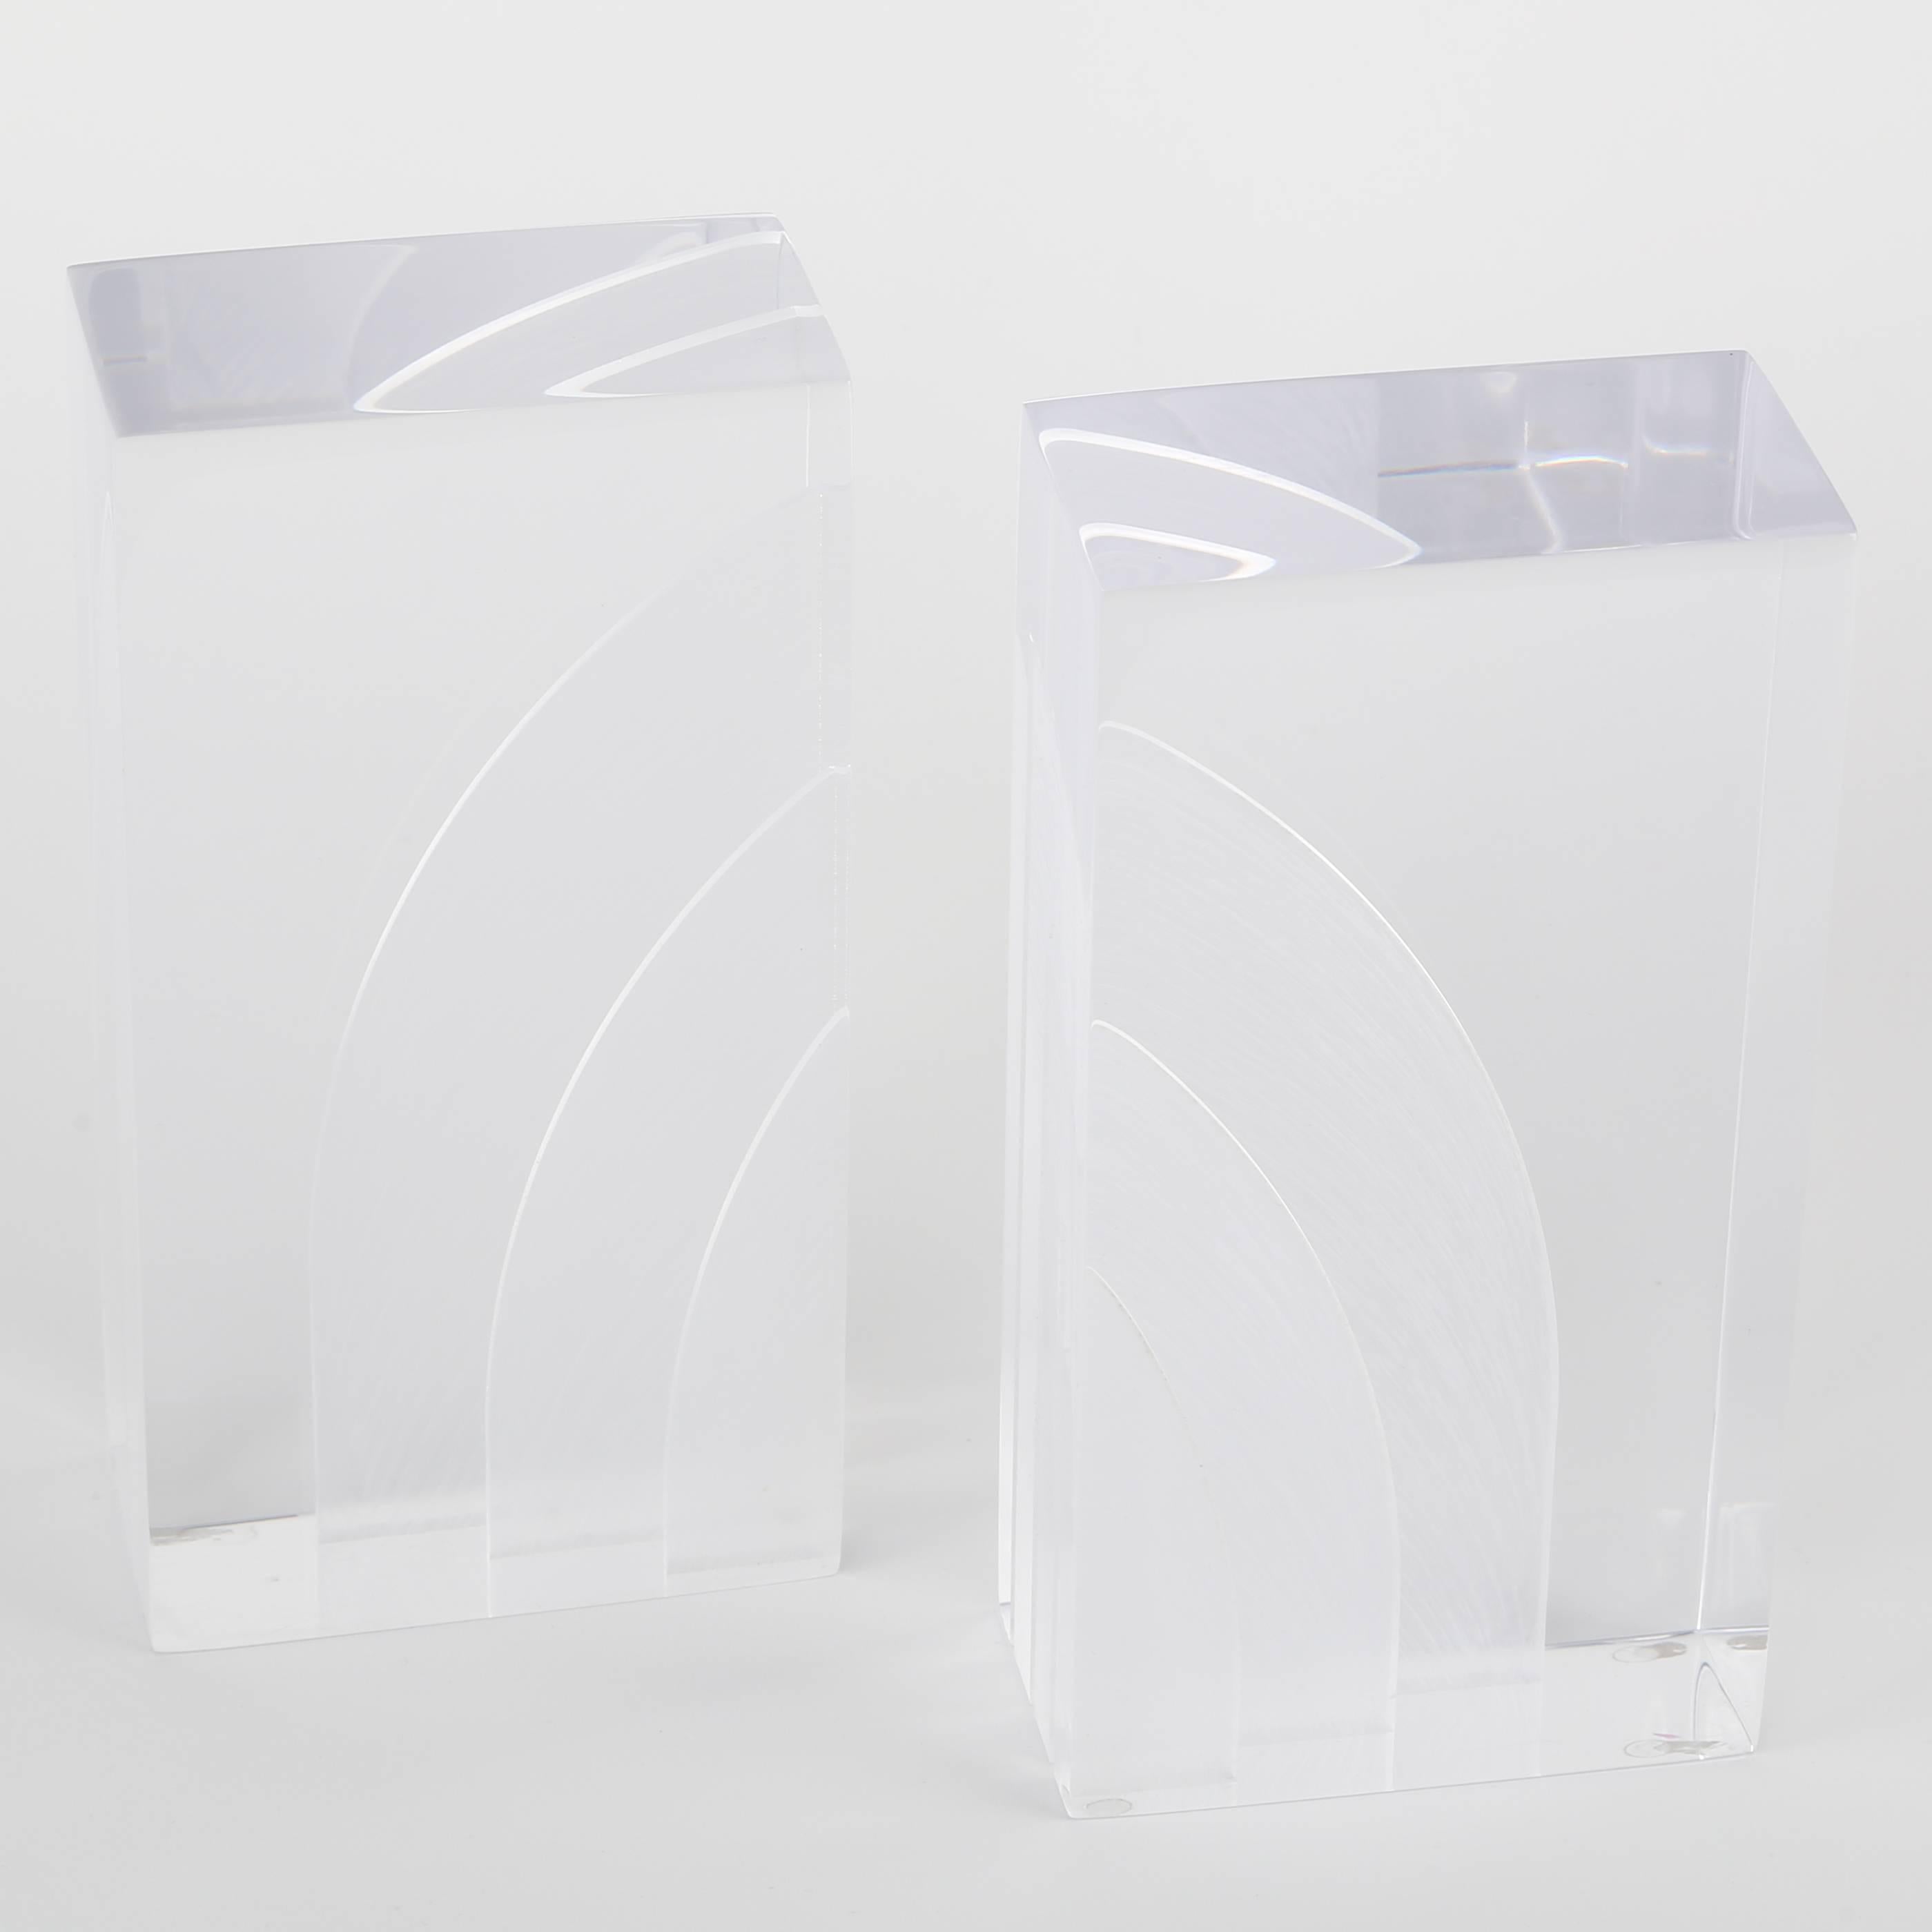 Graphic 1970s Lucite bookends with arched internal designs created by saw cuts, very unusual. These bookends are in our Brooklyn showroom.